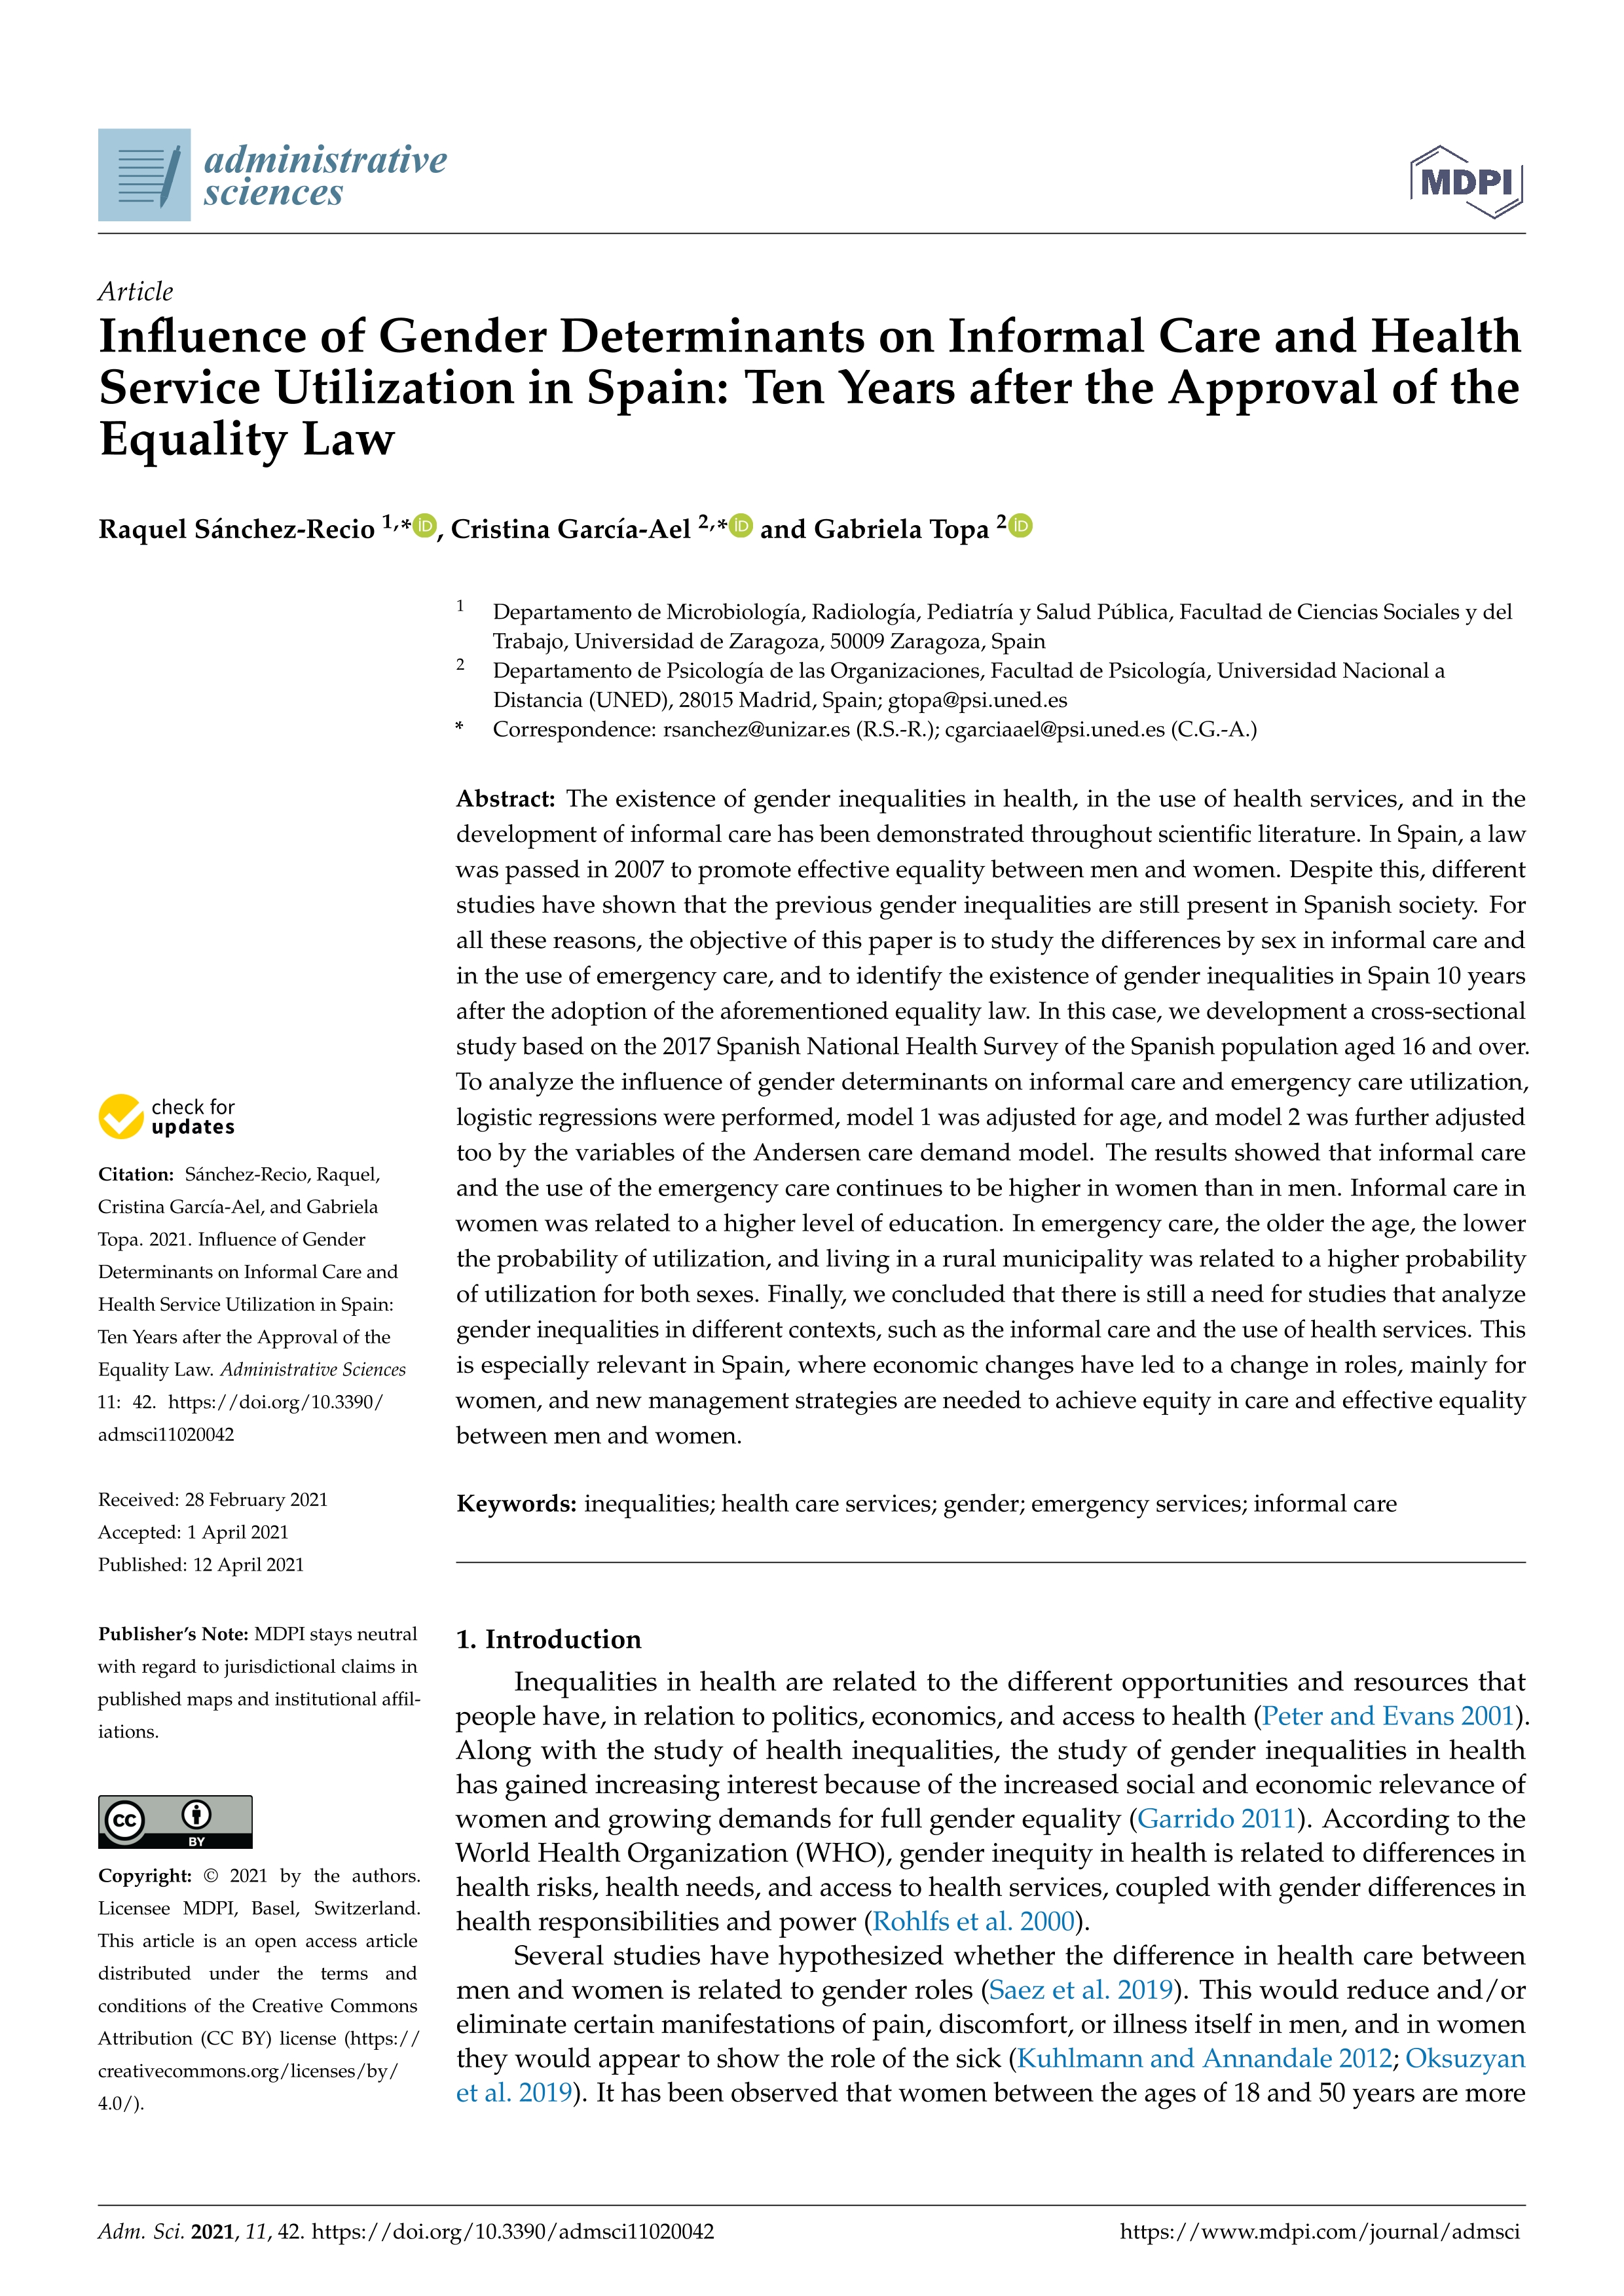 Influence of gender determinants on informal care and health service utilization in Spain: Ten years after the approval of the equality law